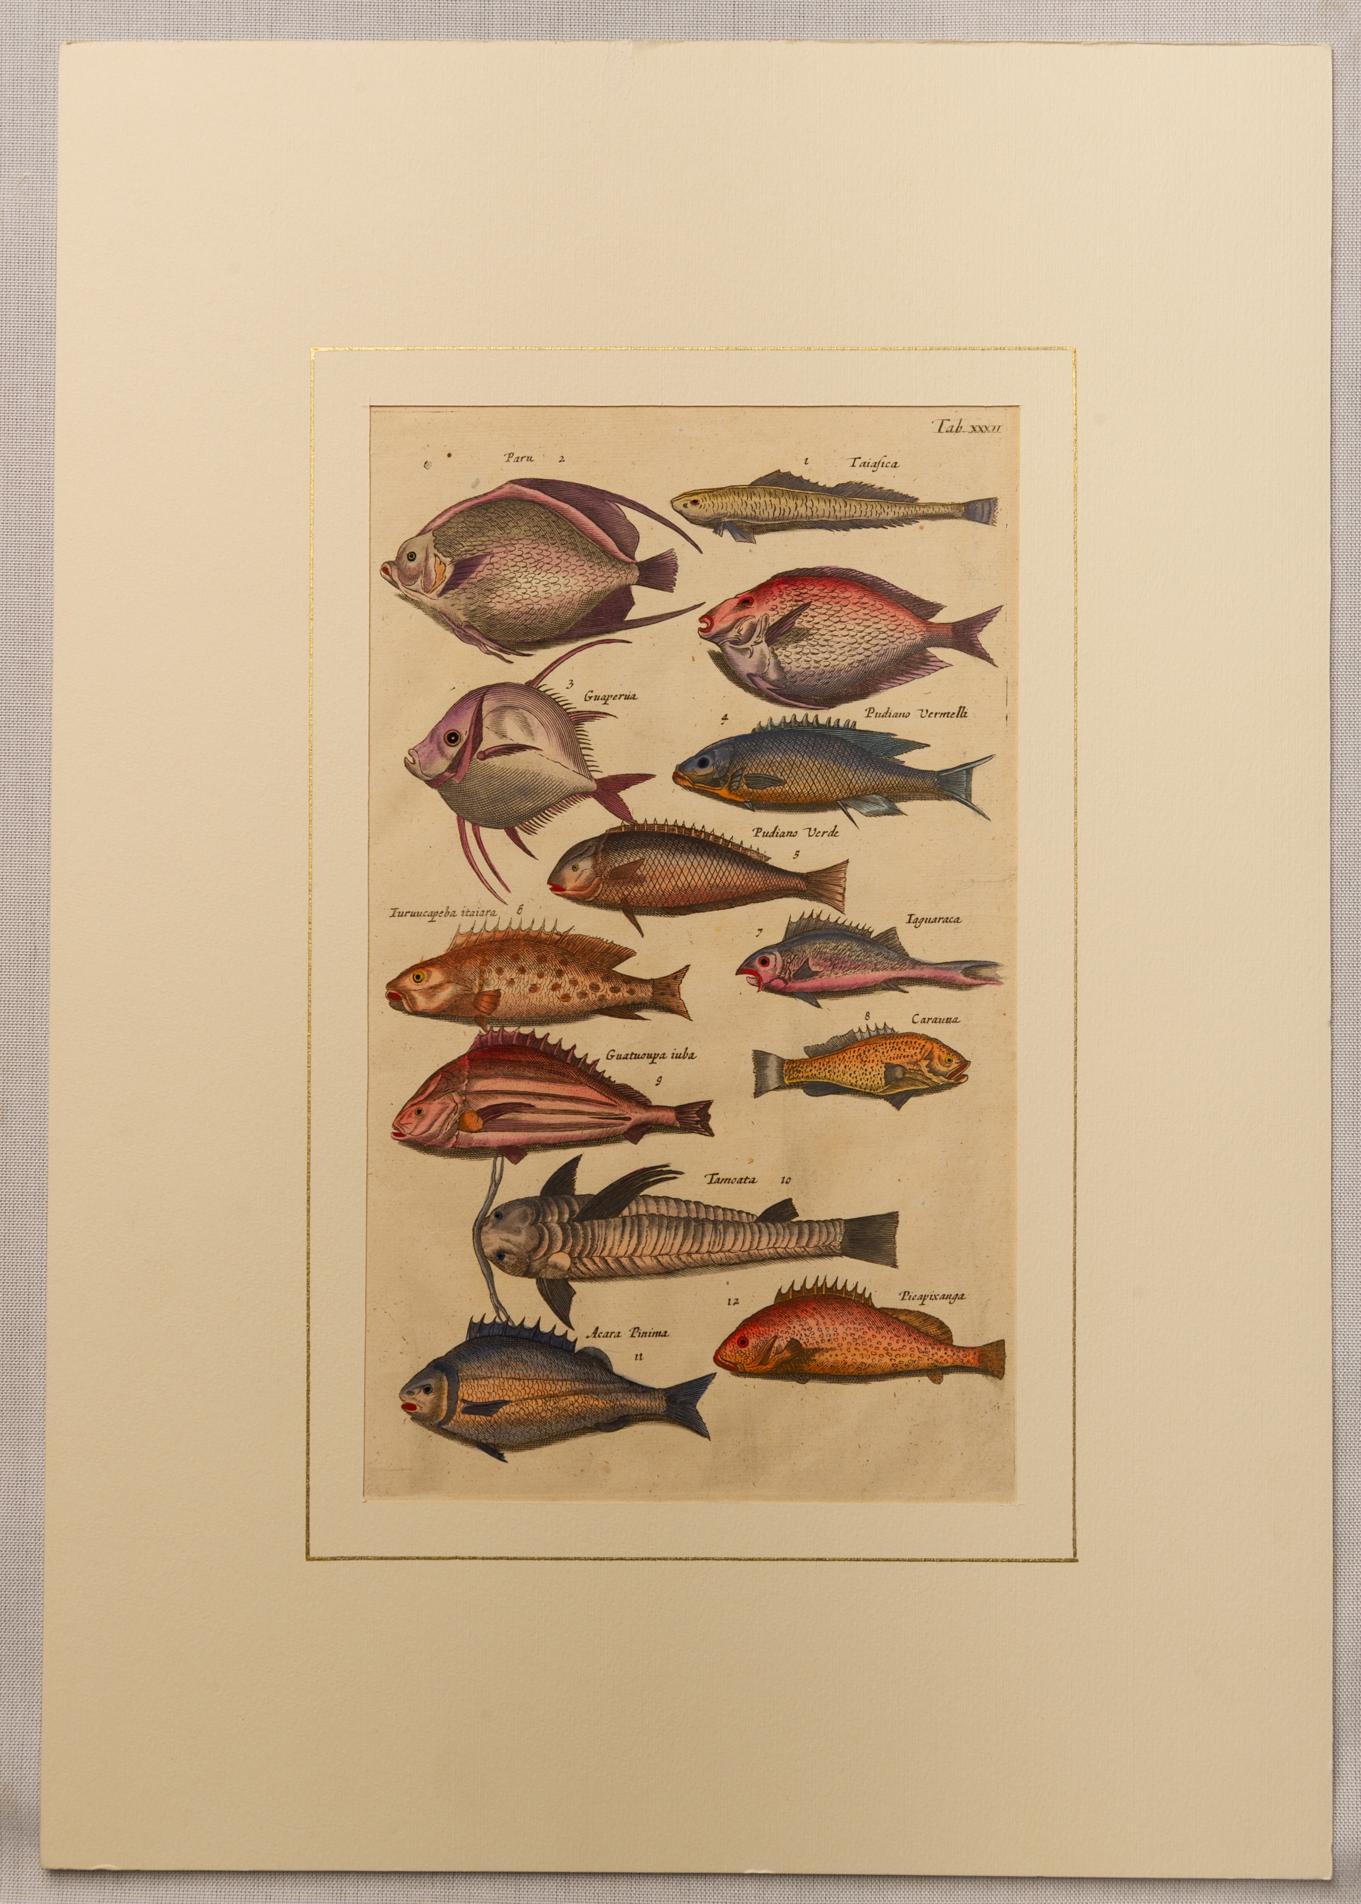 ST/172 -. 3-4-5-8 - Rare series of fishes etchings in Latin, hand watercolored. The other ones (that I just published on 1stdibs) are in English; these ones are in Latin.